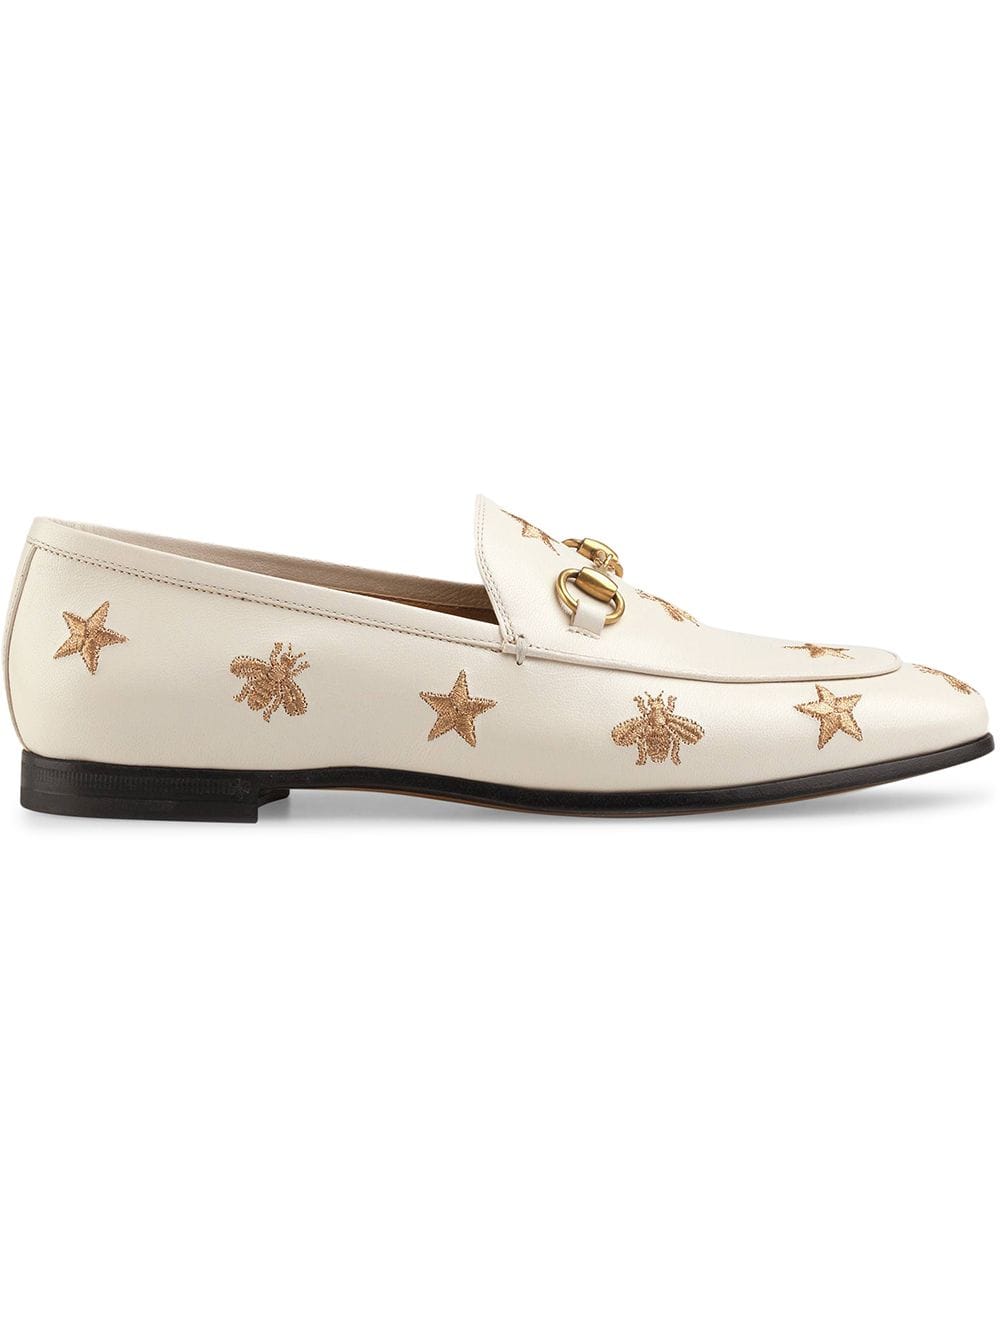 Gucci Jordaan embroidered leather loafer